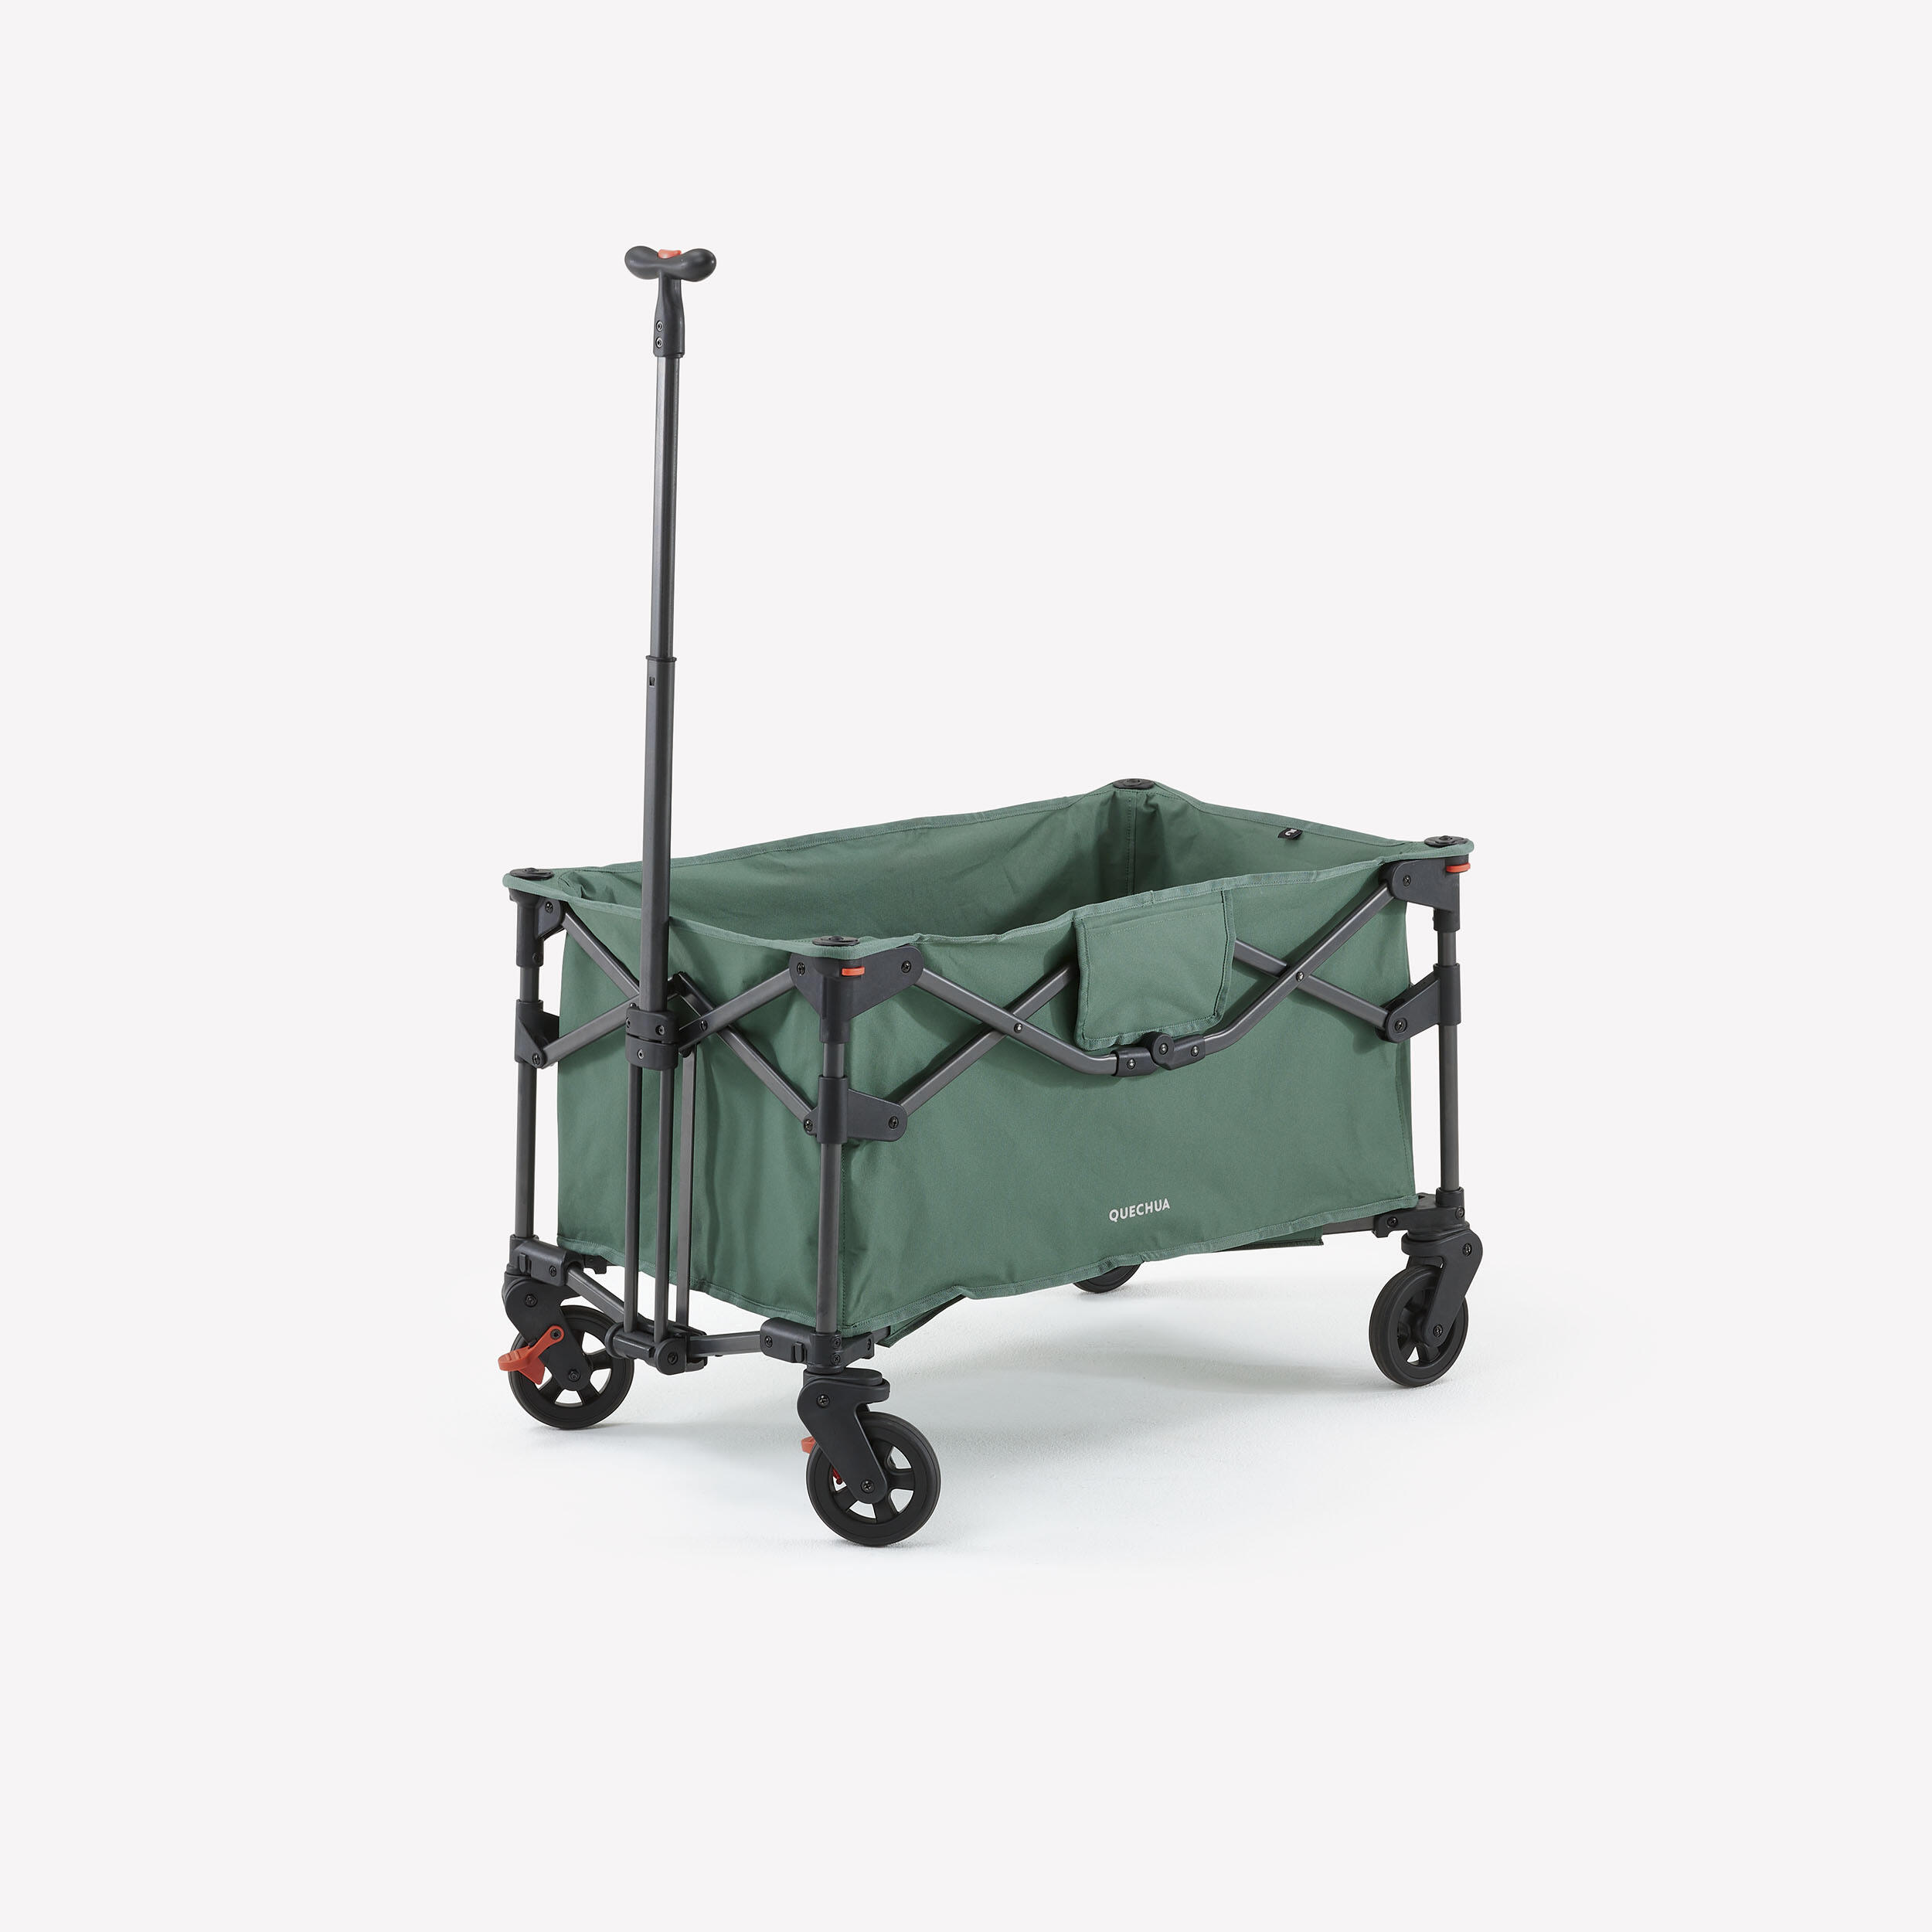 COMPACT TROLLEY FOR TRANSPORTING CAMPING EQUIPMENT - ULTRA-COMPACT TROLLEY 2/6